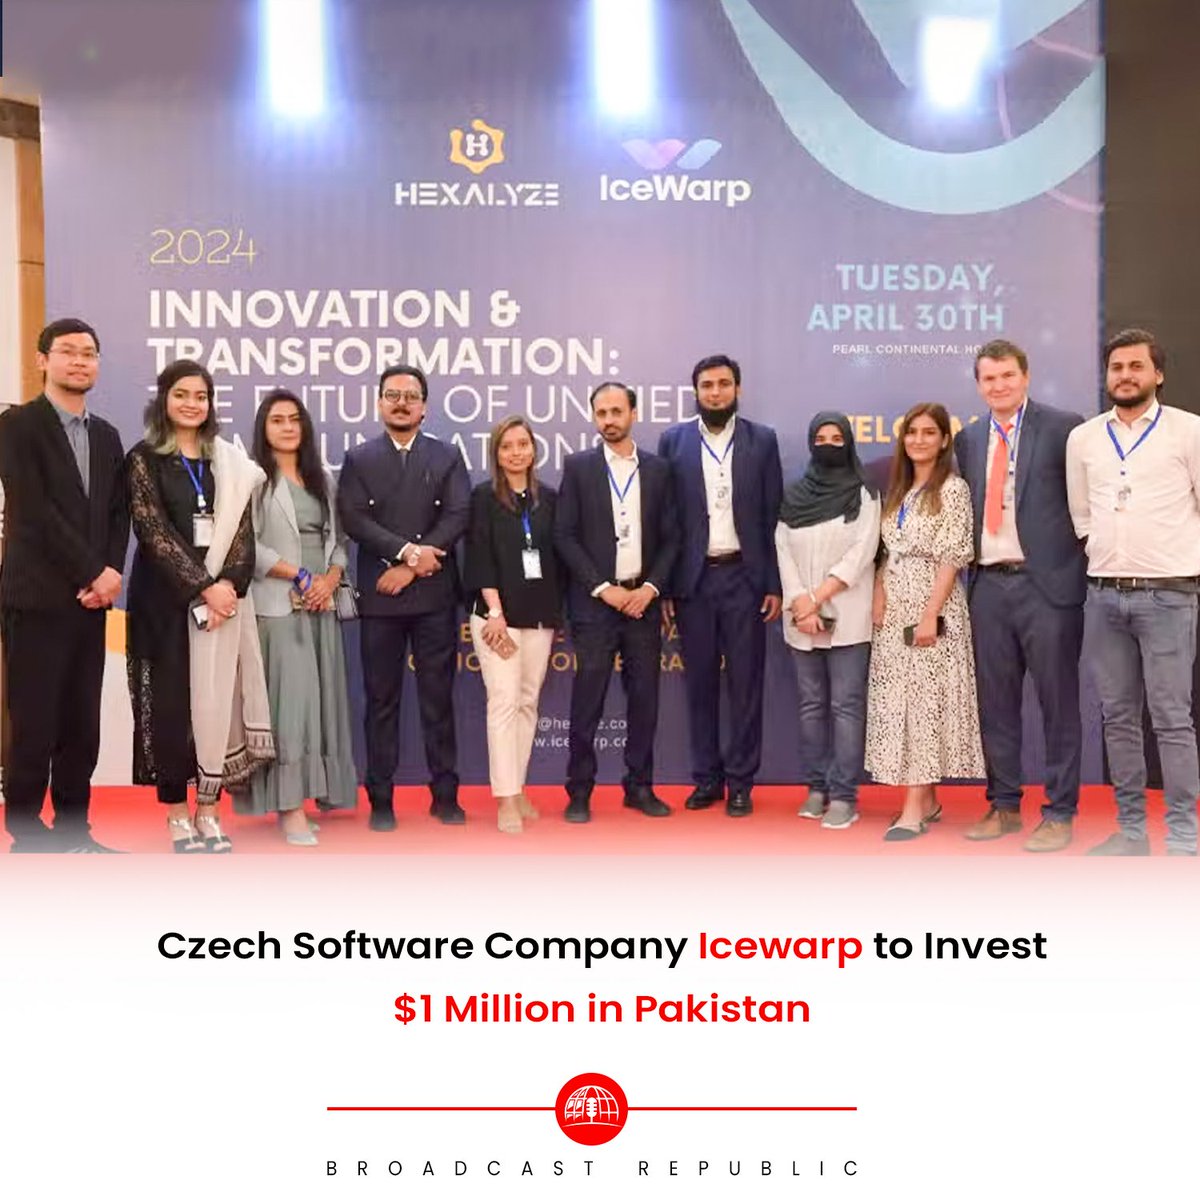 Icewarp, a software company from the Czech Republic, is set to invest over $1 million in Pakistan to establish a data center and launch full-fledged operations.